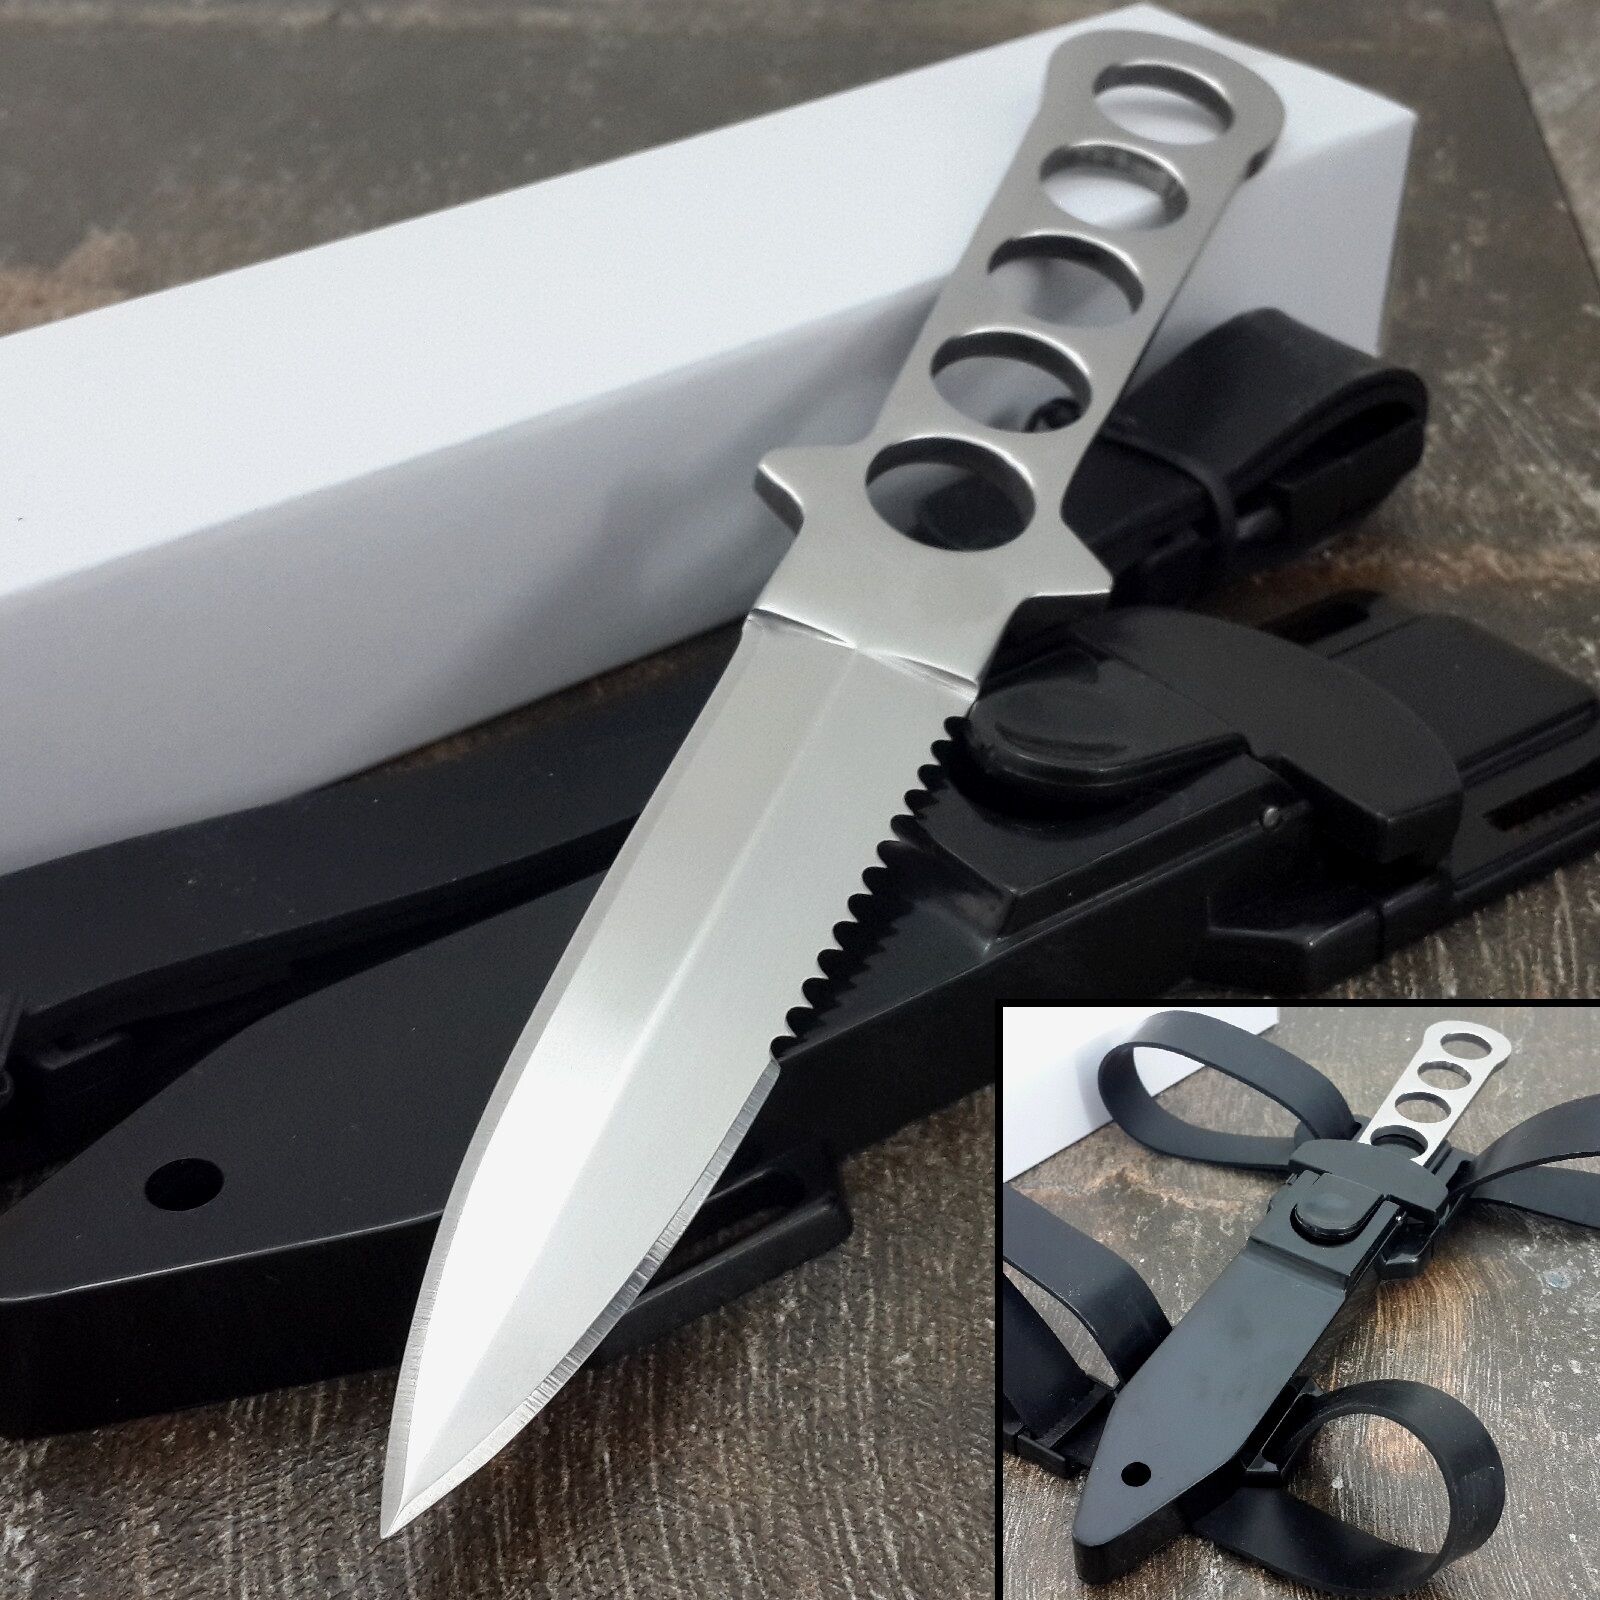 9" Scuba Diving Stainless Steel Fixed Blade Knife Survival Hunting Serrated New!